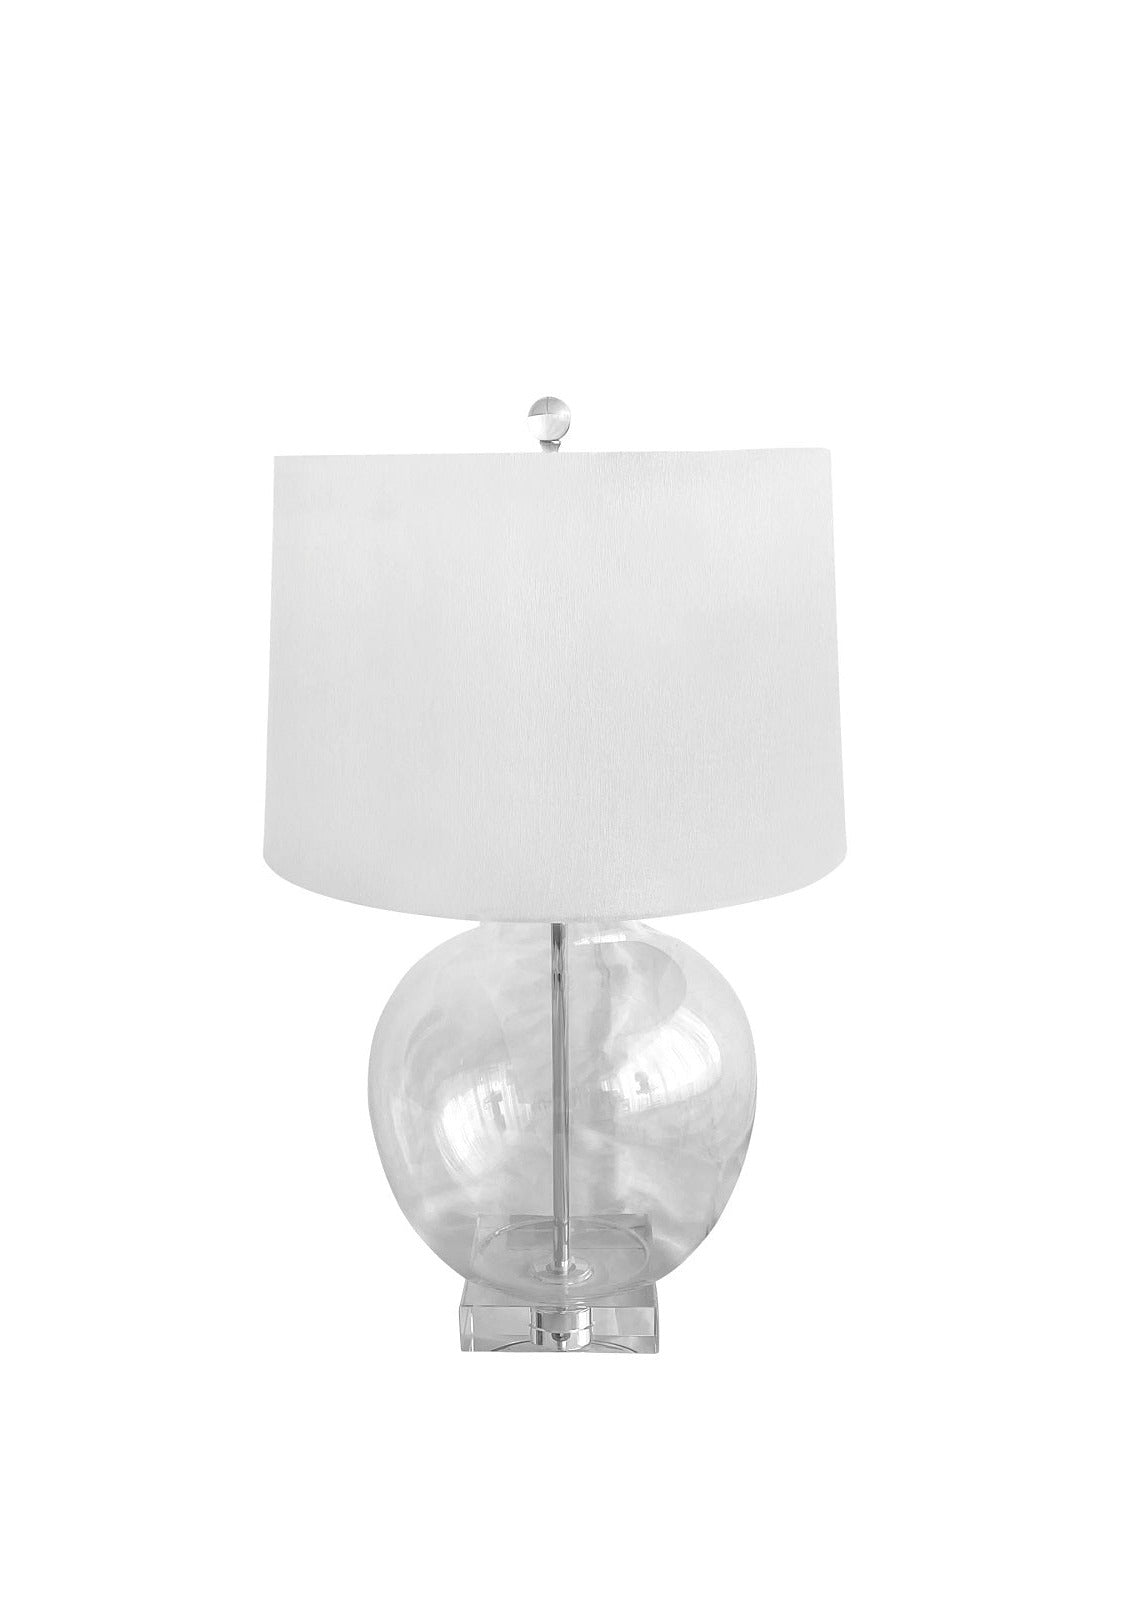 Glass Bubble Lamp with White Shade